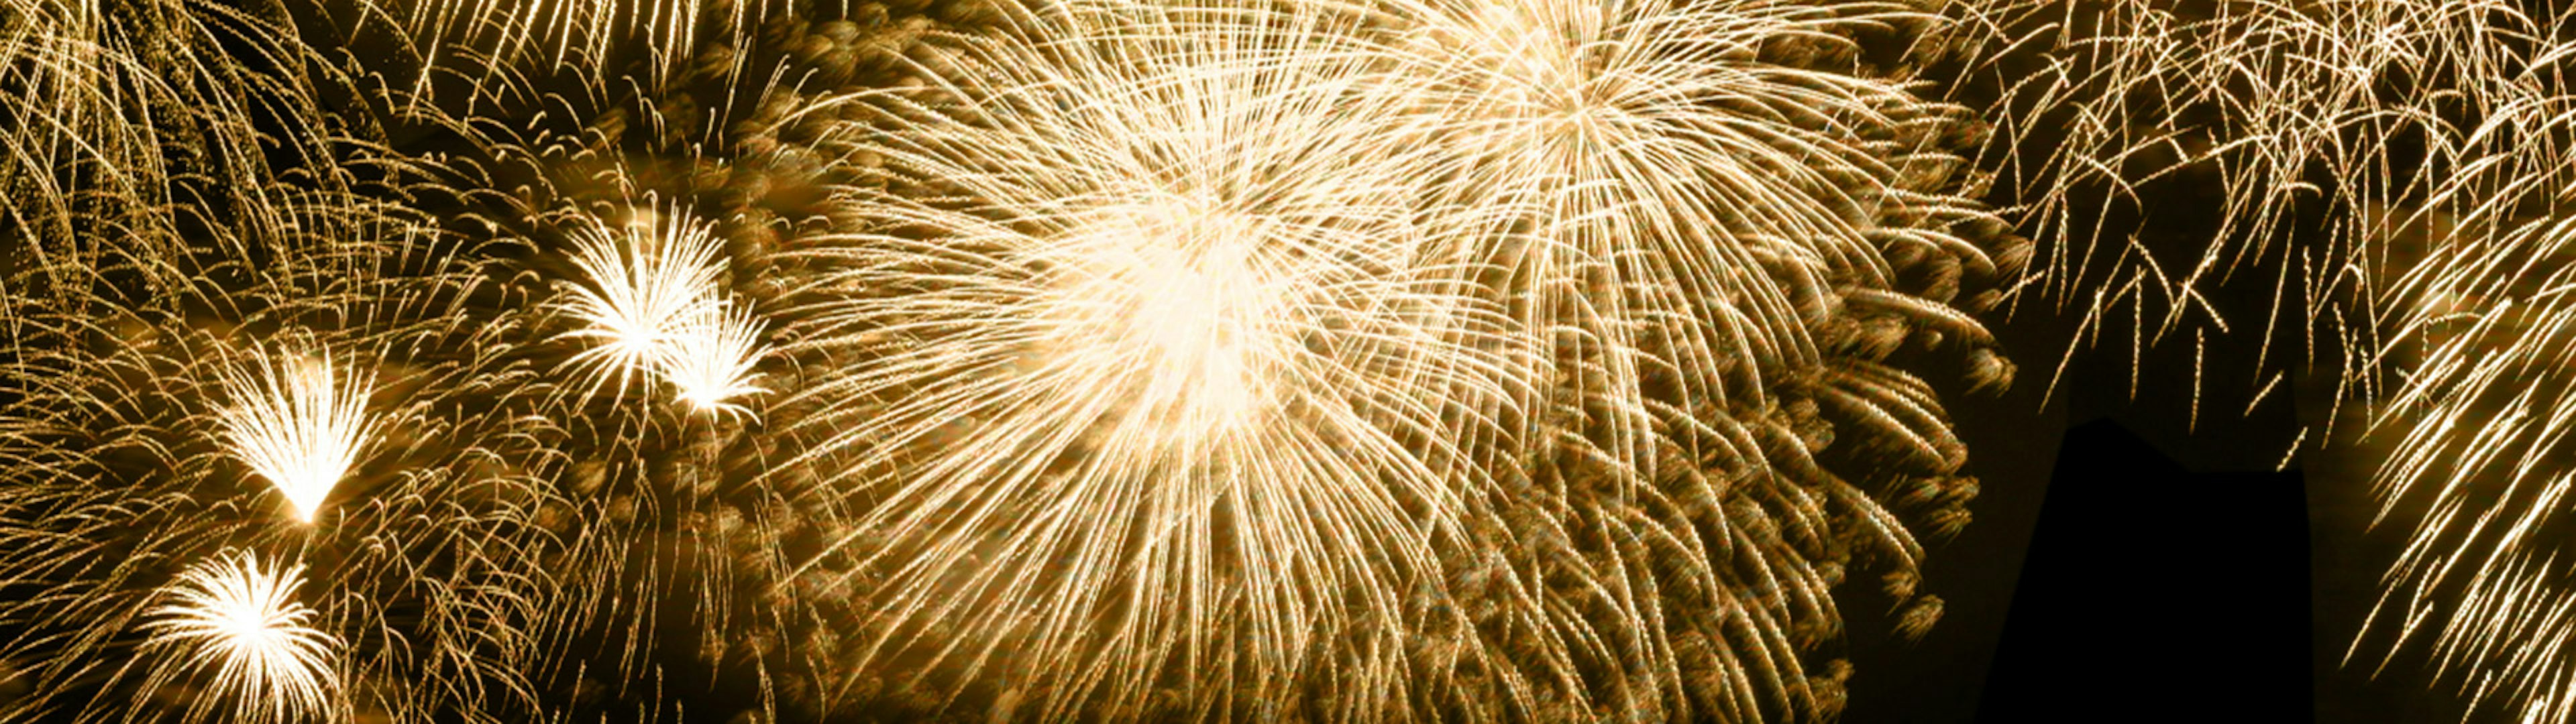 Yellow fireworks exploding in the sky